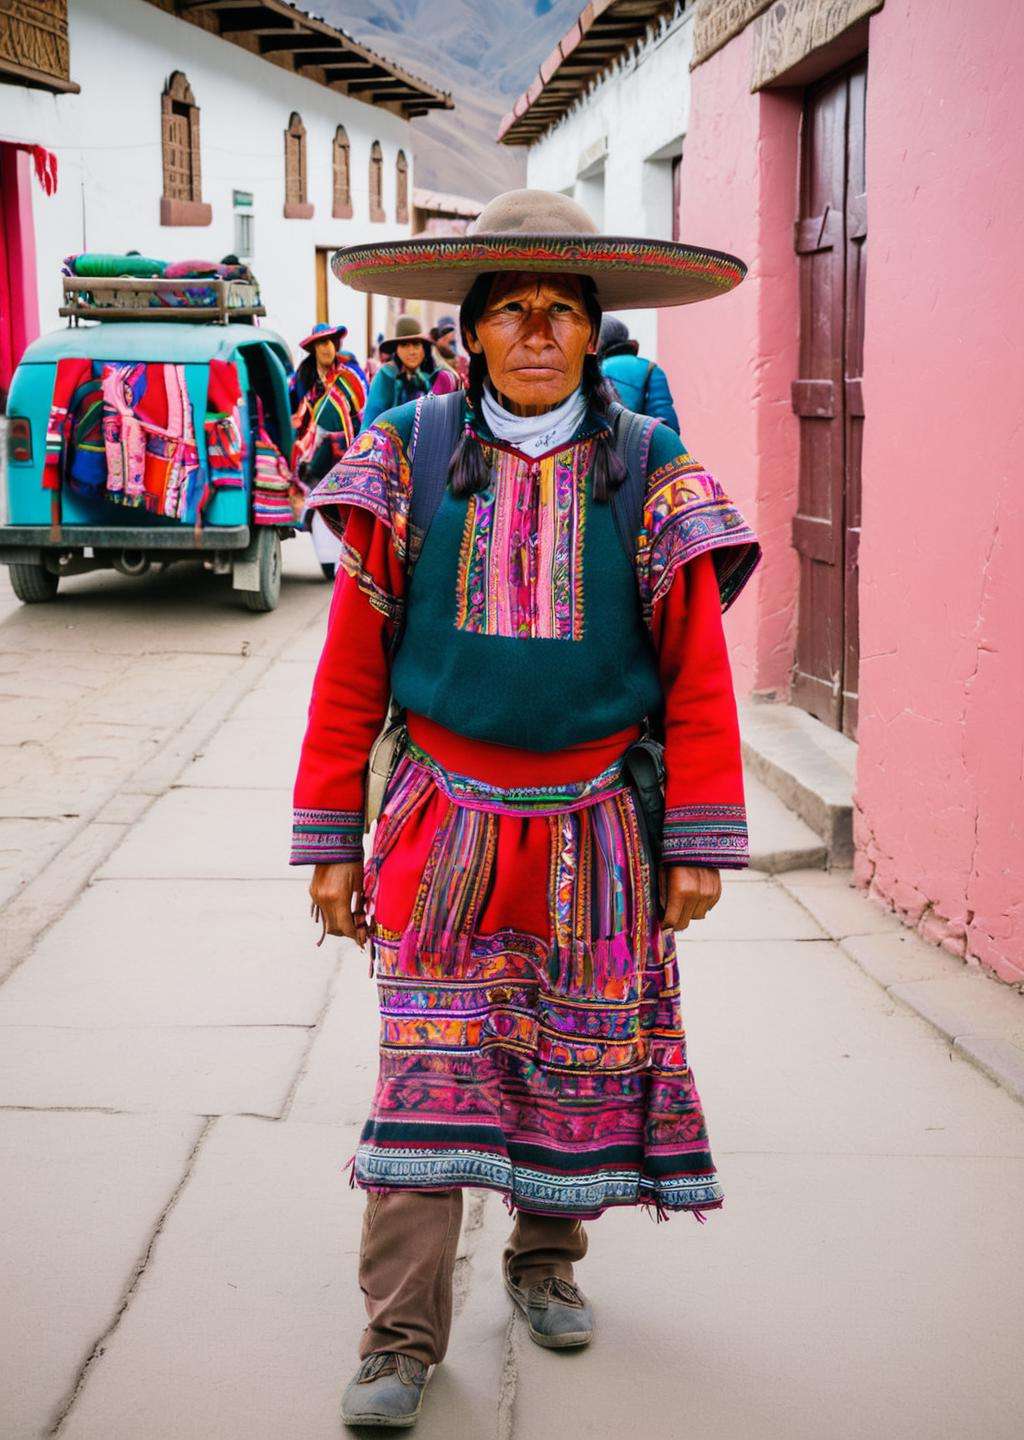 travel photography in Peru<lora:Travel_photography_sdxl:1.0>